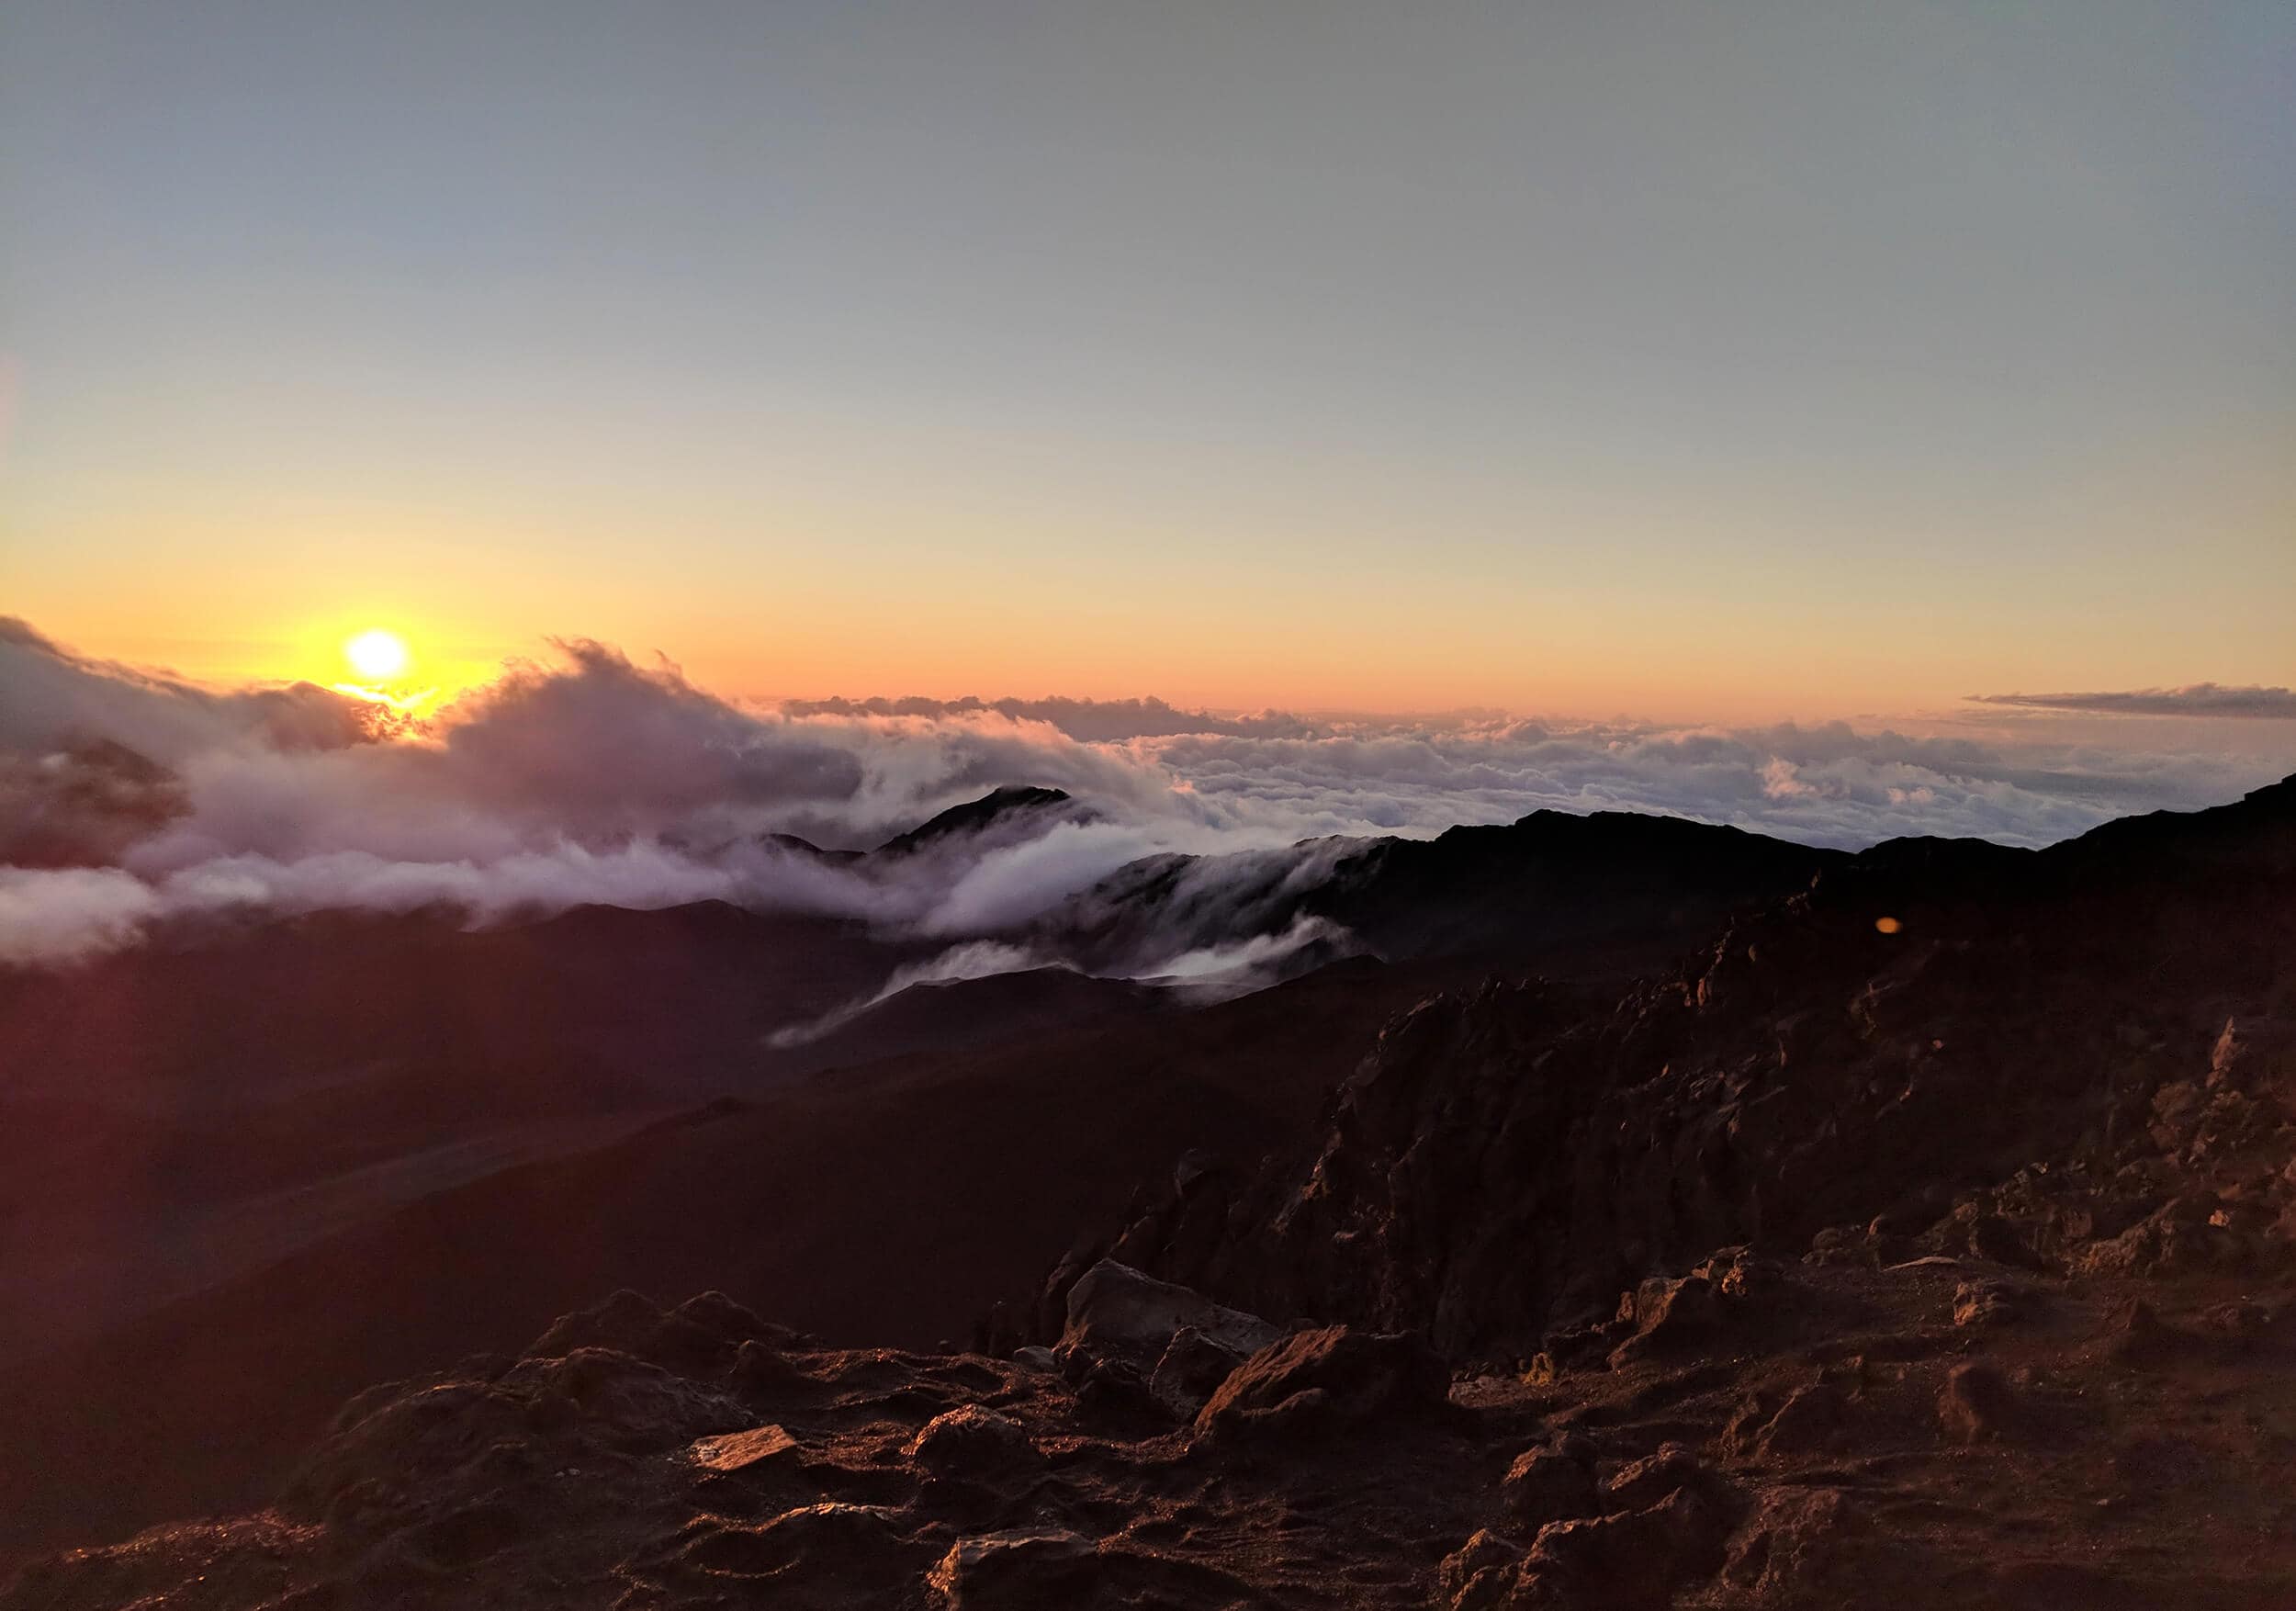 Travel bloggers reveal their most unforgettable travel experiences - Sunrise over Haleakala Volcano on Maui in Hawaii